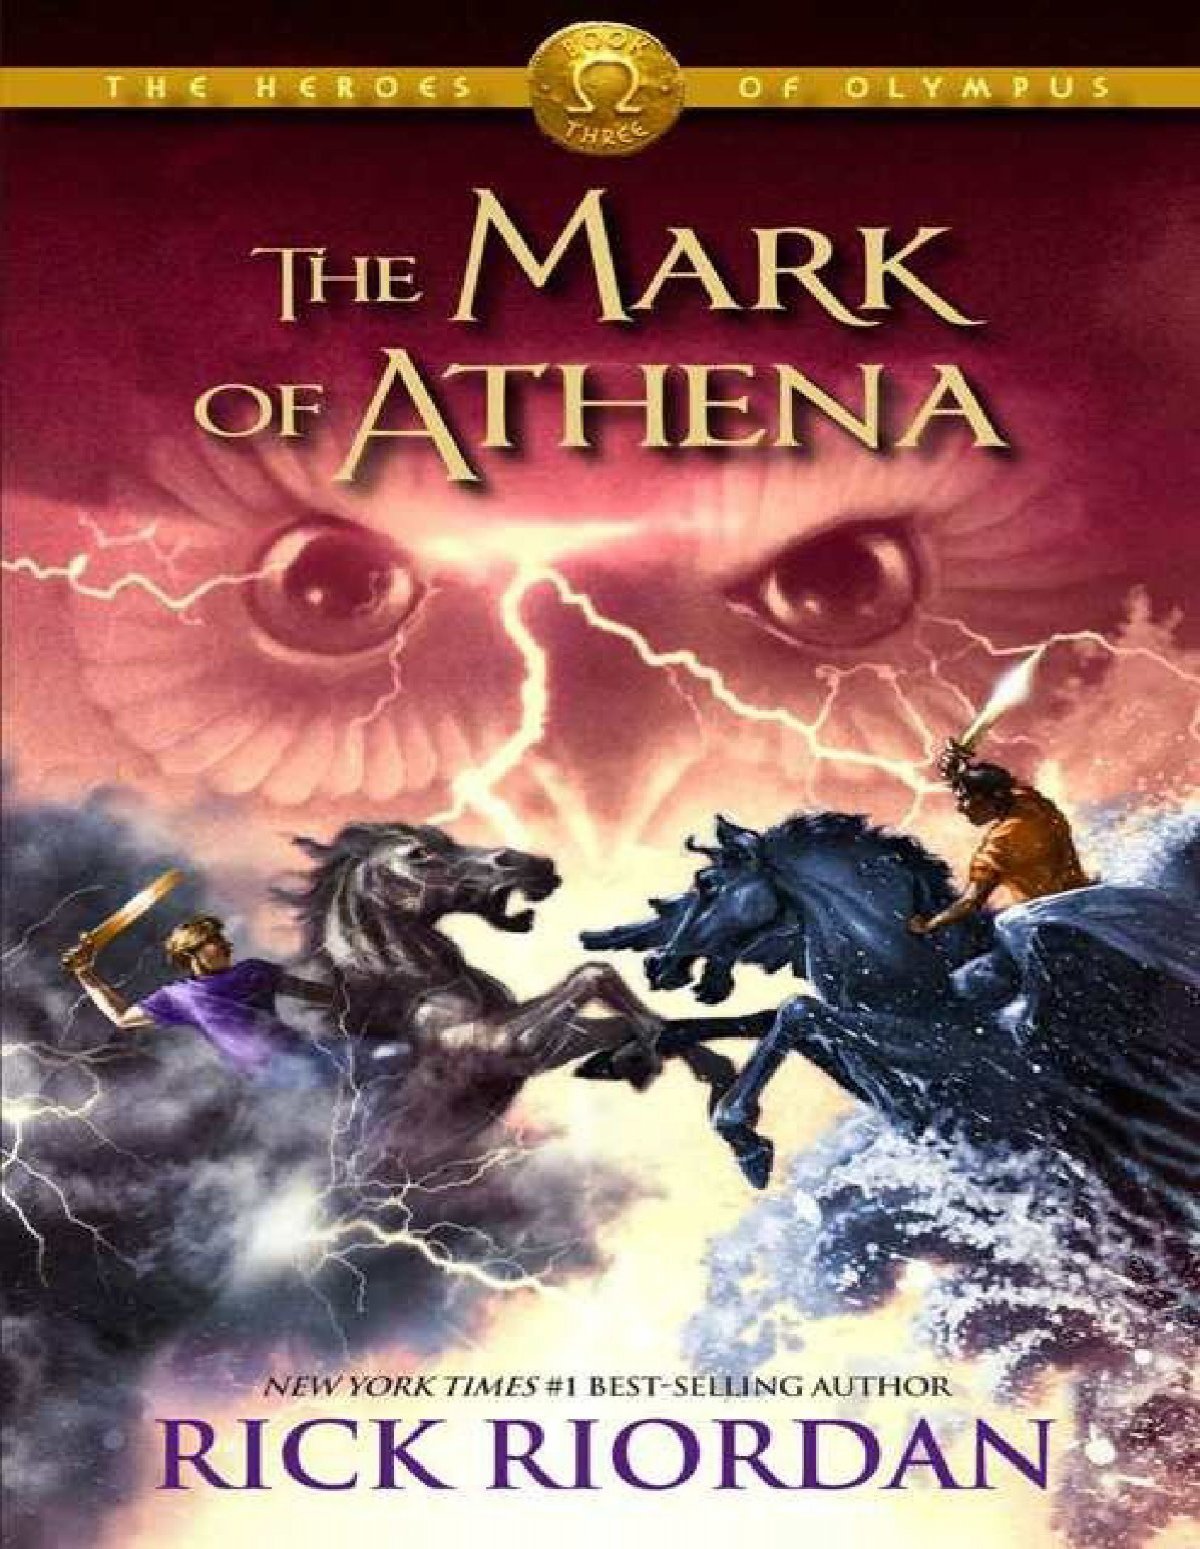 I want to believe Athena but what is faith without doubt? : [ID